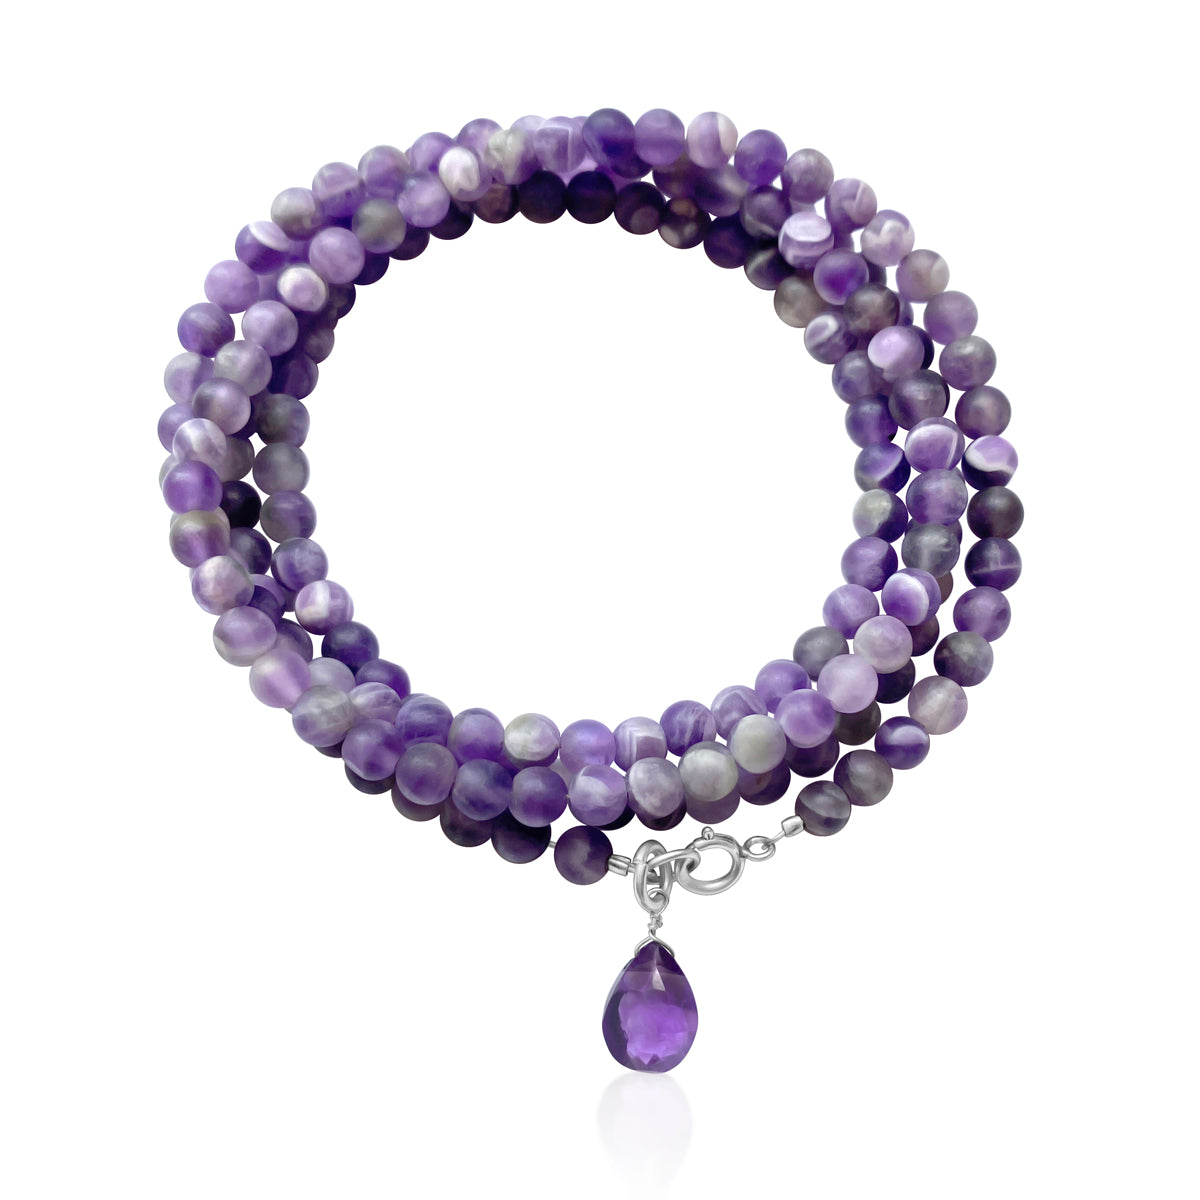 Large Bead Matte Amethyst Bracelet - Alignment with Higher Self